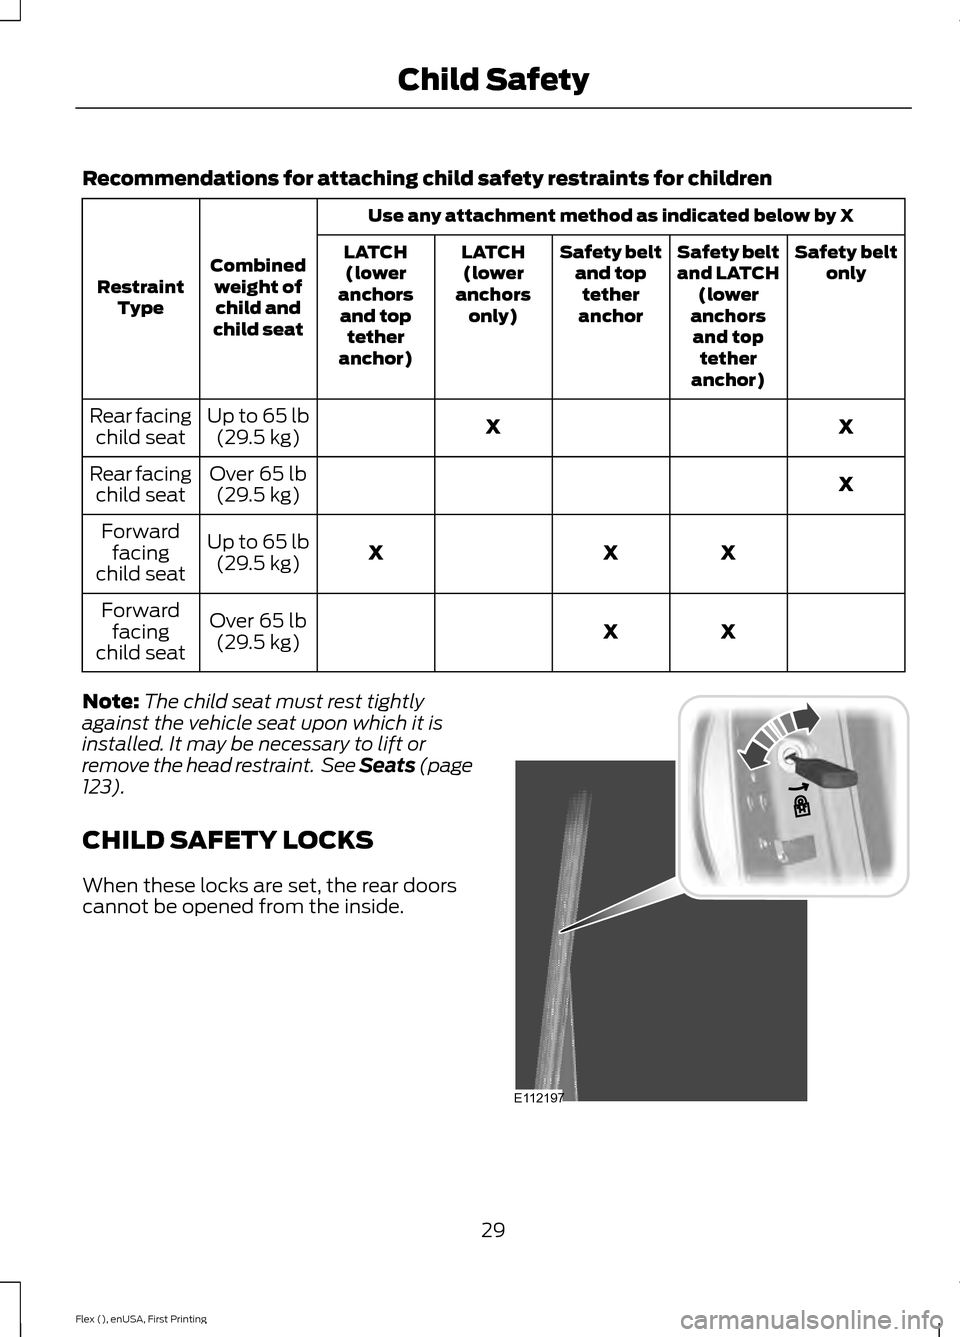 FORD FLEX 2016 1.G Owners Guide Recommendations for attaching child safety restraints for children
Use any attachment method as indicated below by X
Combined weight ofchild and
child seat
Restraint
Type Safety belt
only
Safety belt
